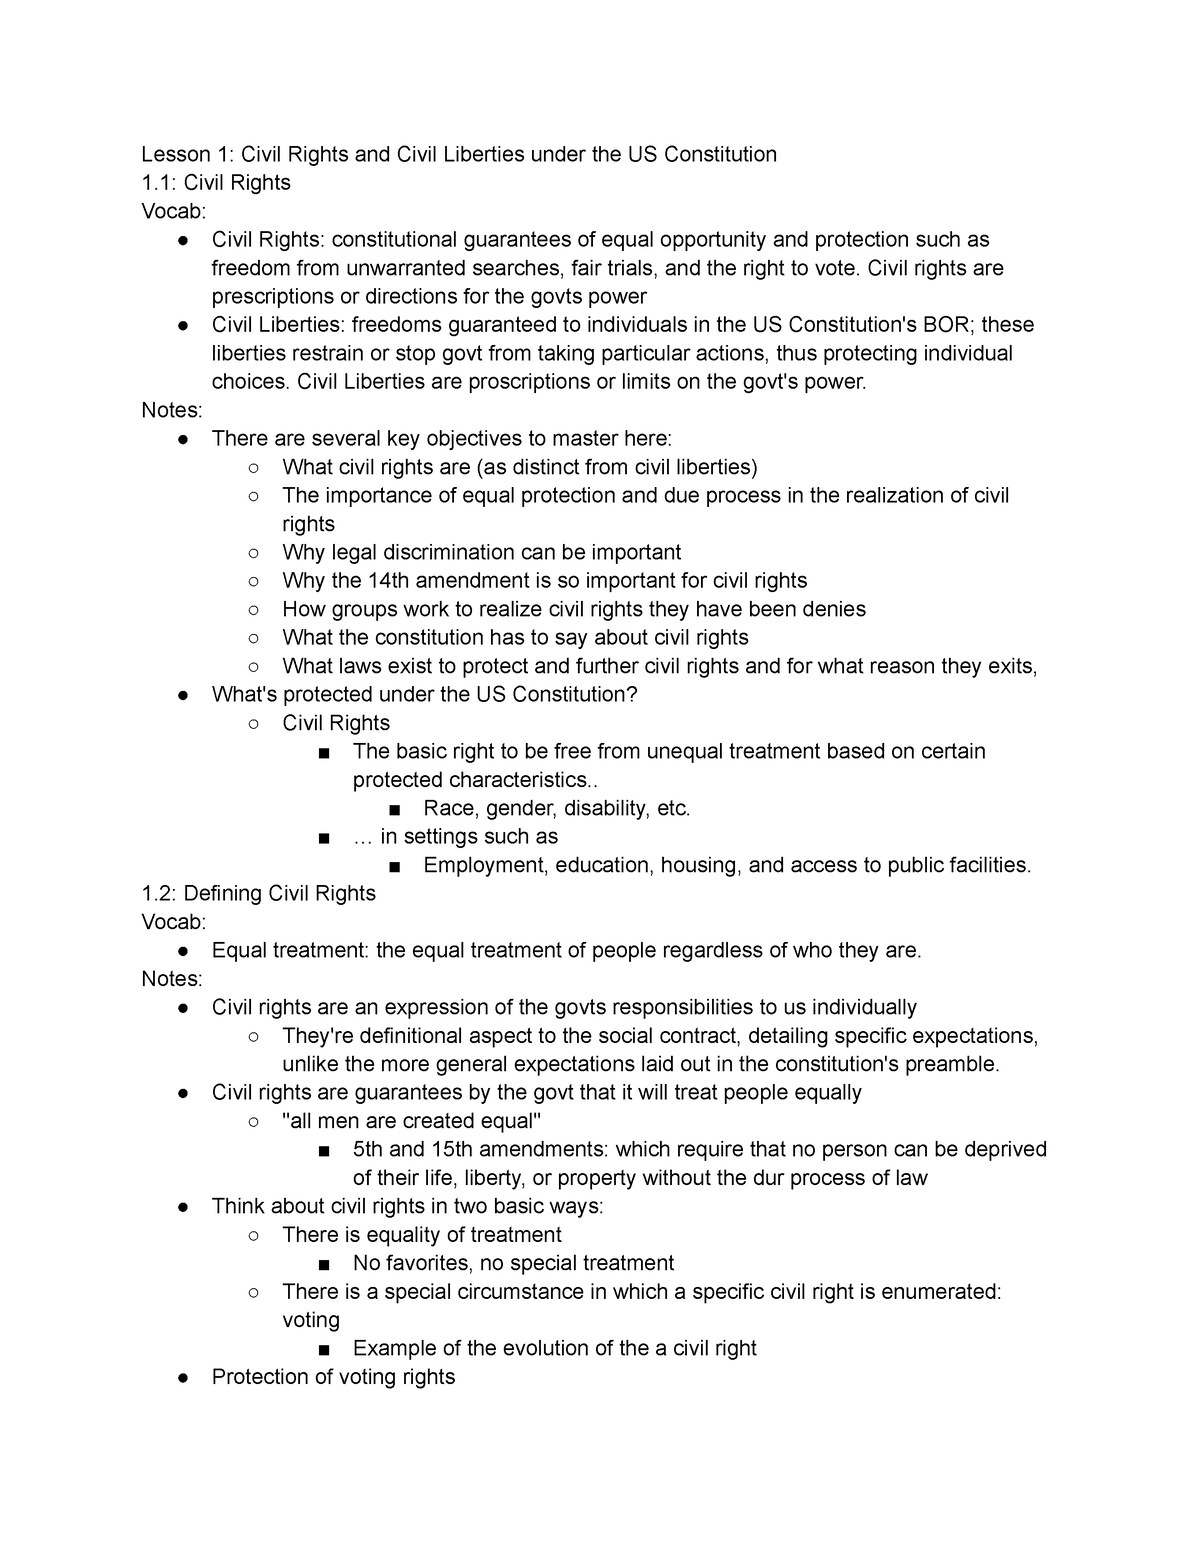 c963-section-4-notes-lesson-1-civil-rights-and-civil-liberties